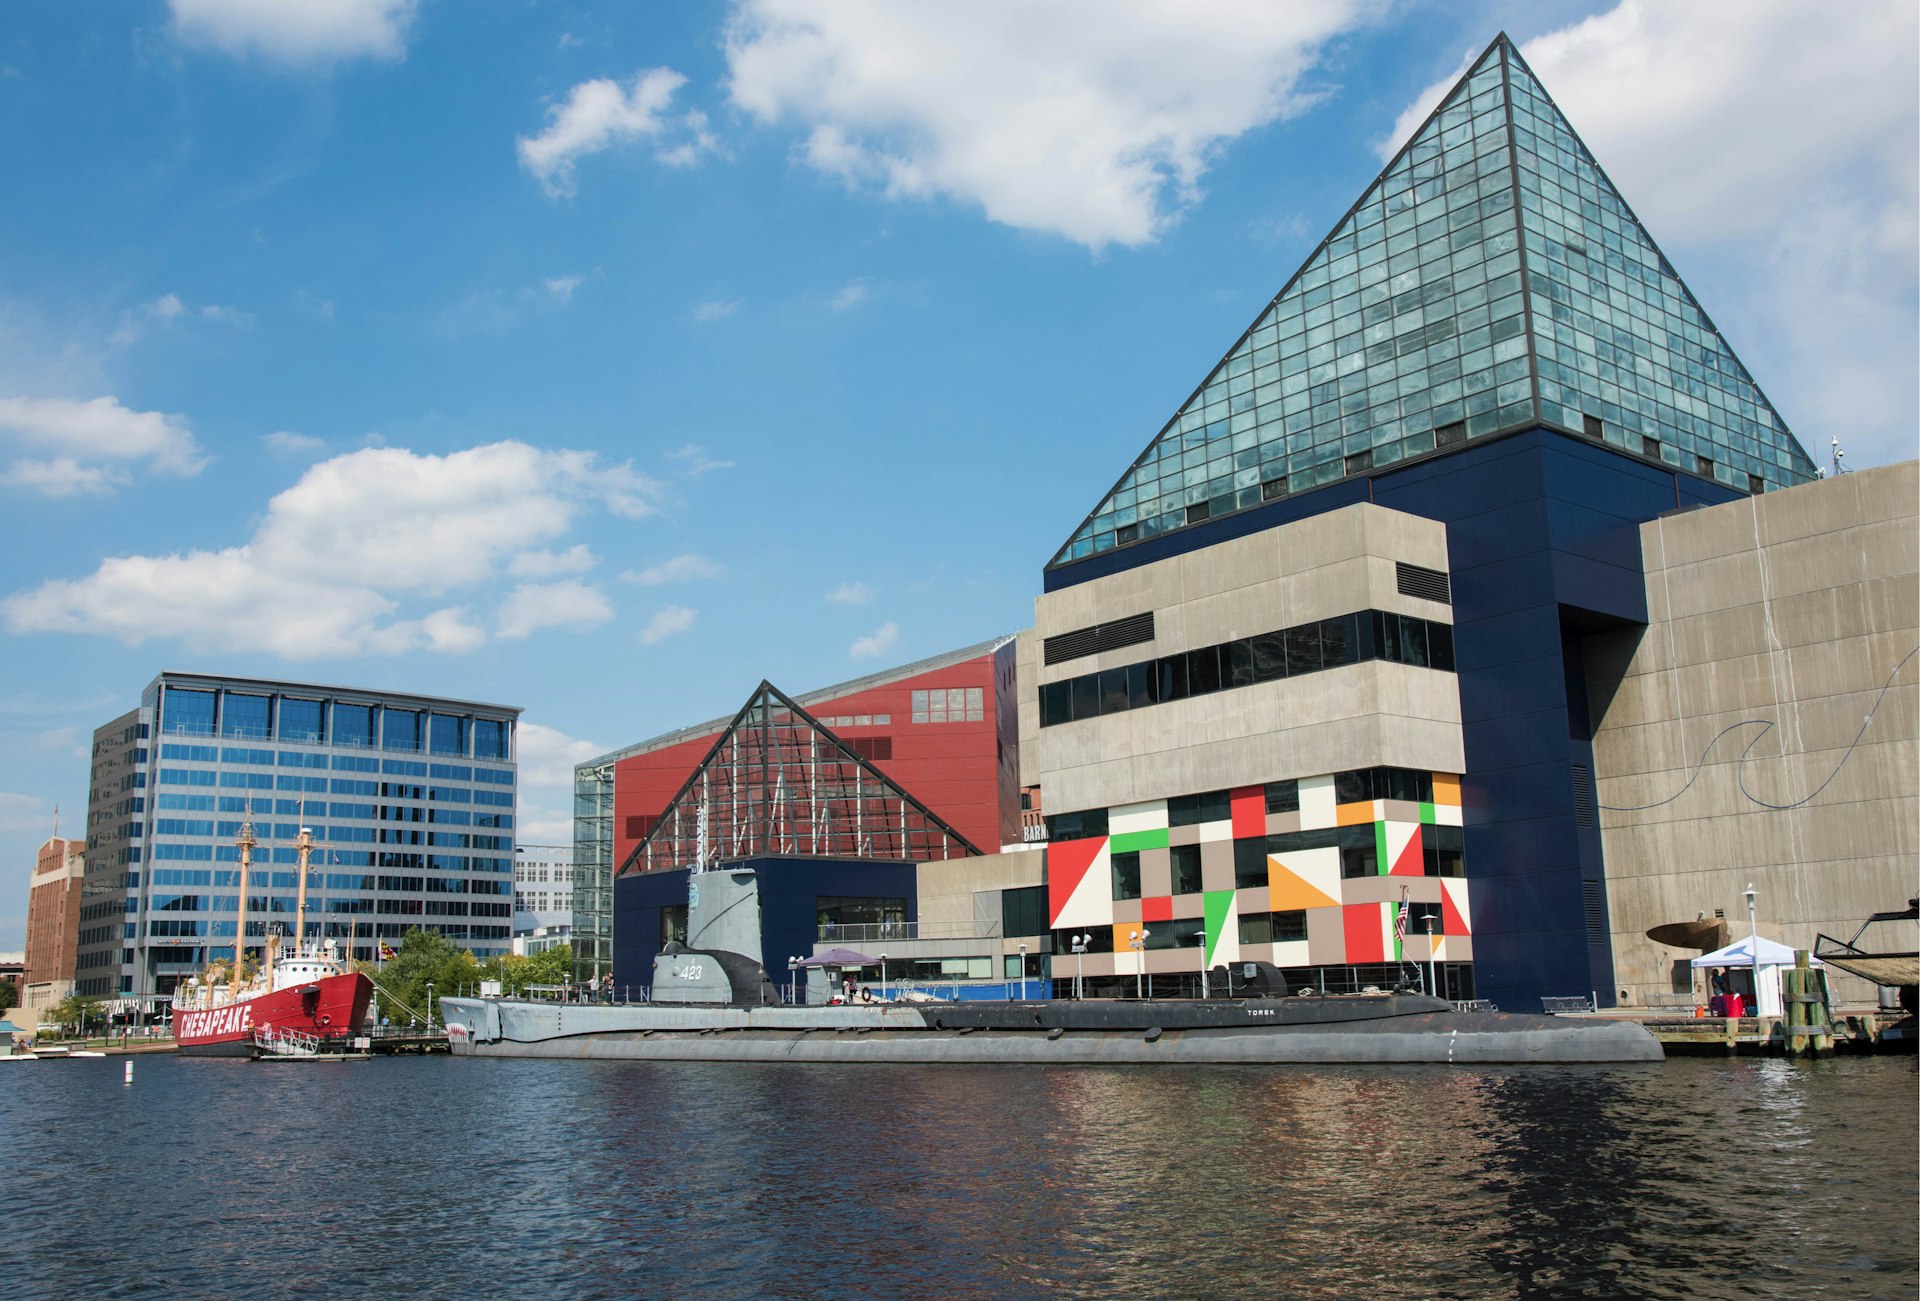 Historic ships in front of the National Aquarium, Baltimore, Maryland. (Photo By: Education Images/UIG via Getty Images)